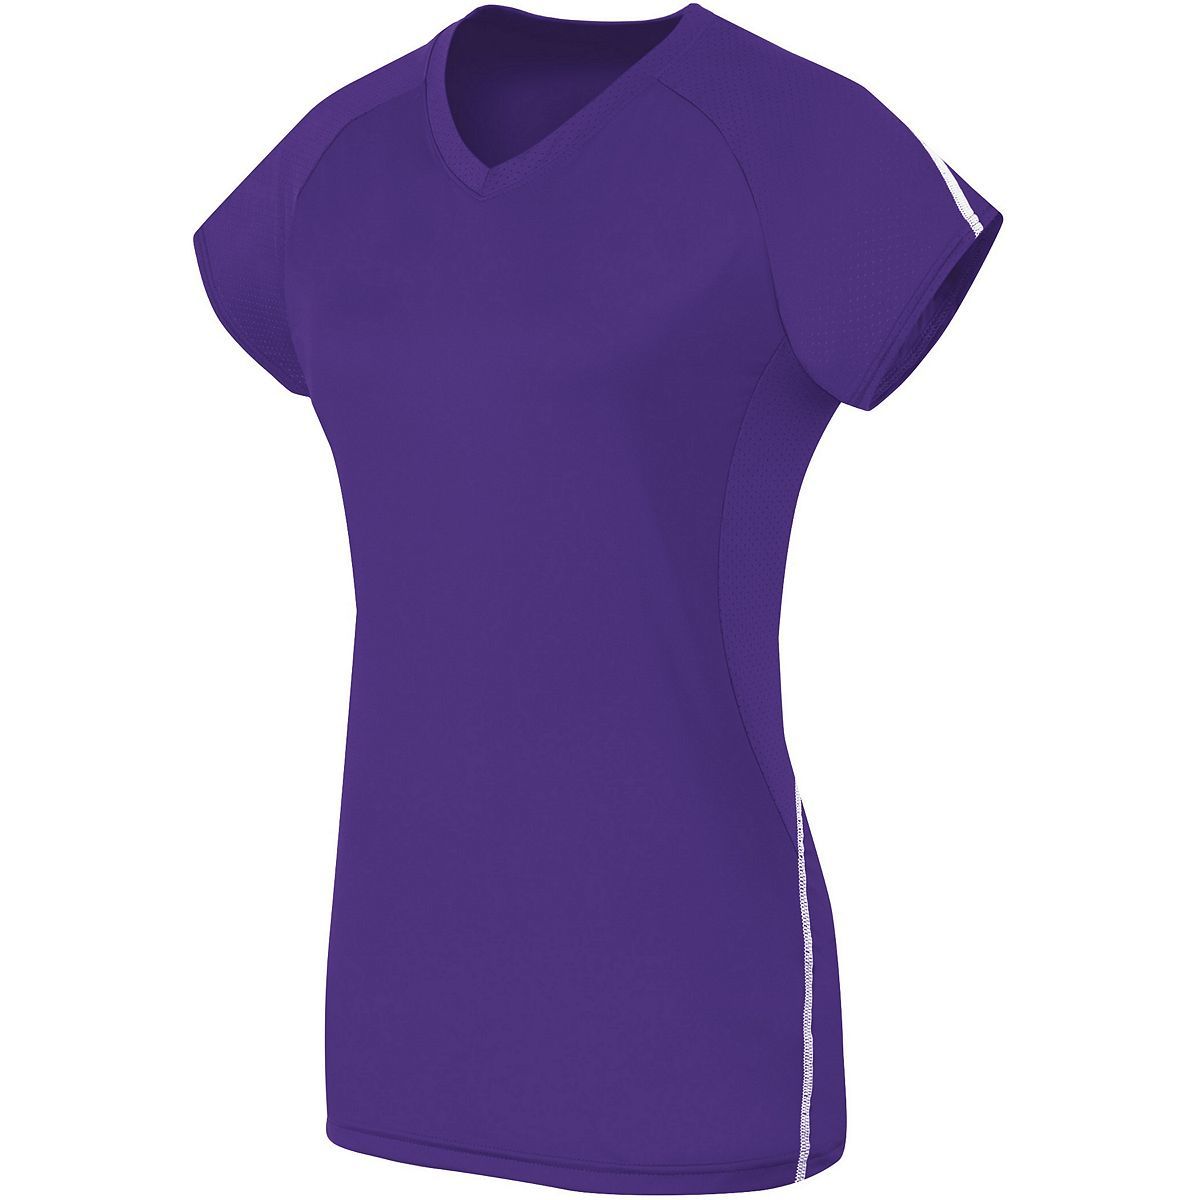 High 5 Ladies Short Sleeve Solid Jersey in Purple/White  -Part of the Ladies, Ladies-Jersey, High5-Products, Volleyball, Shirts product lines at KanaleyCreations.com